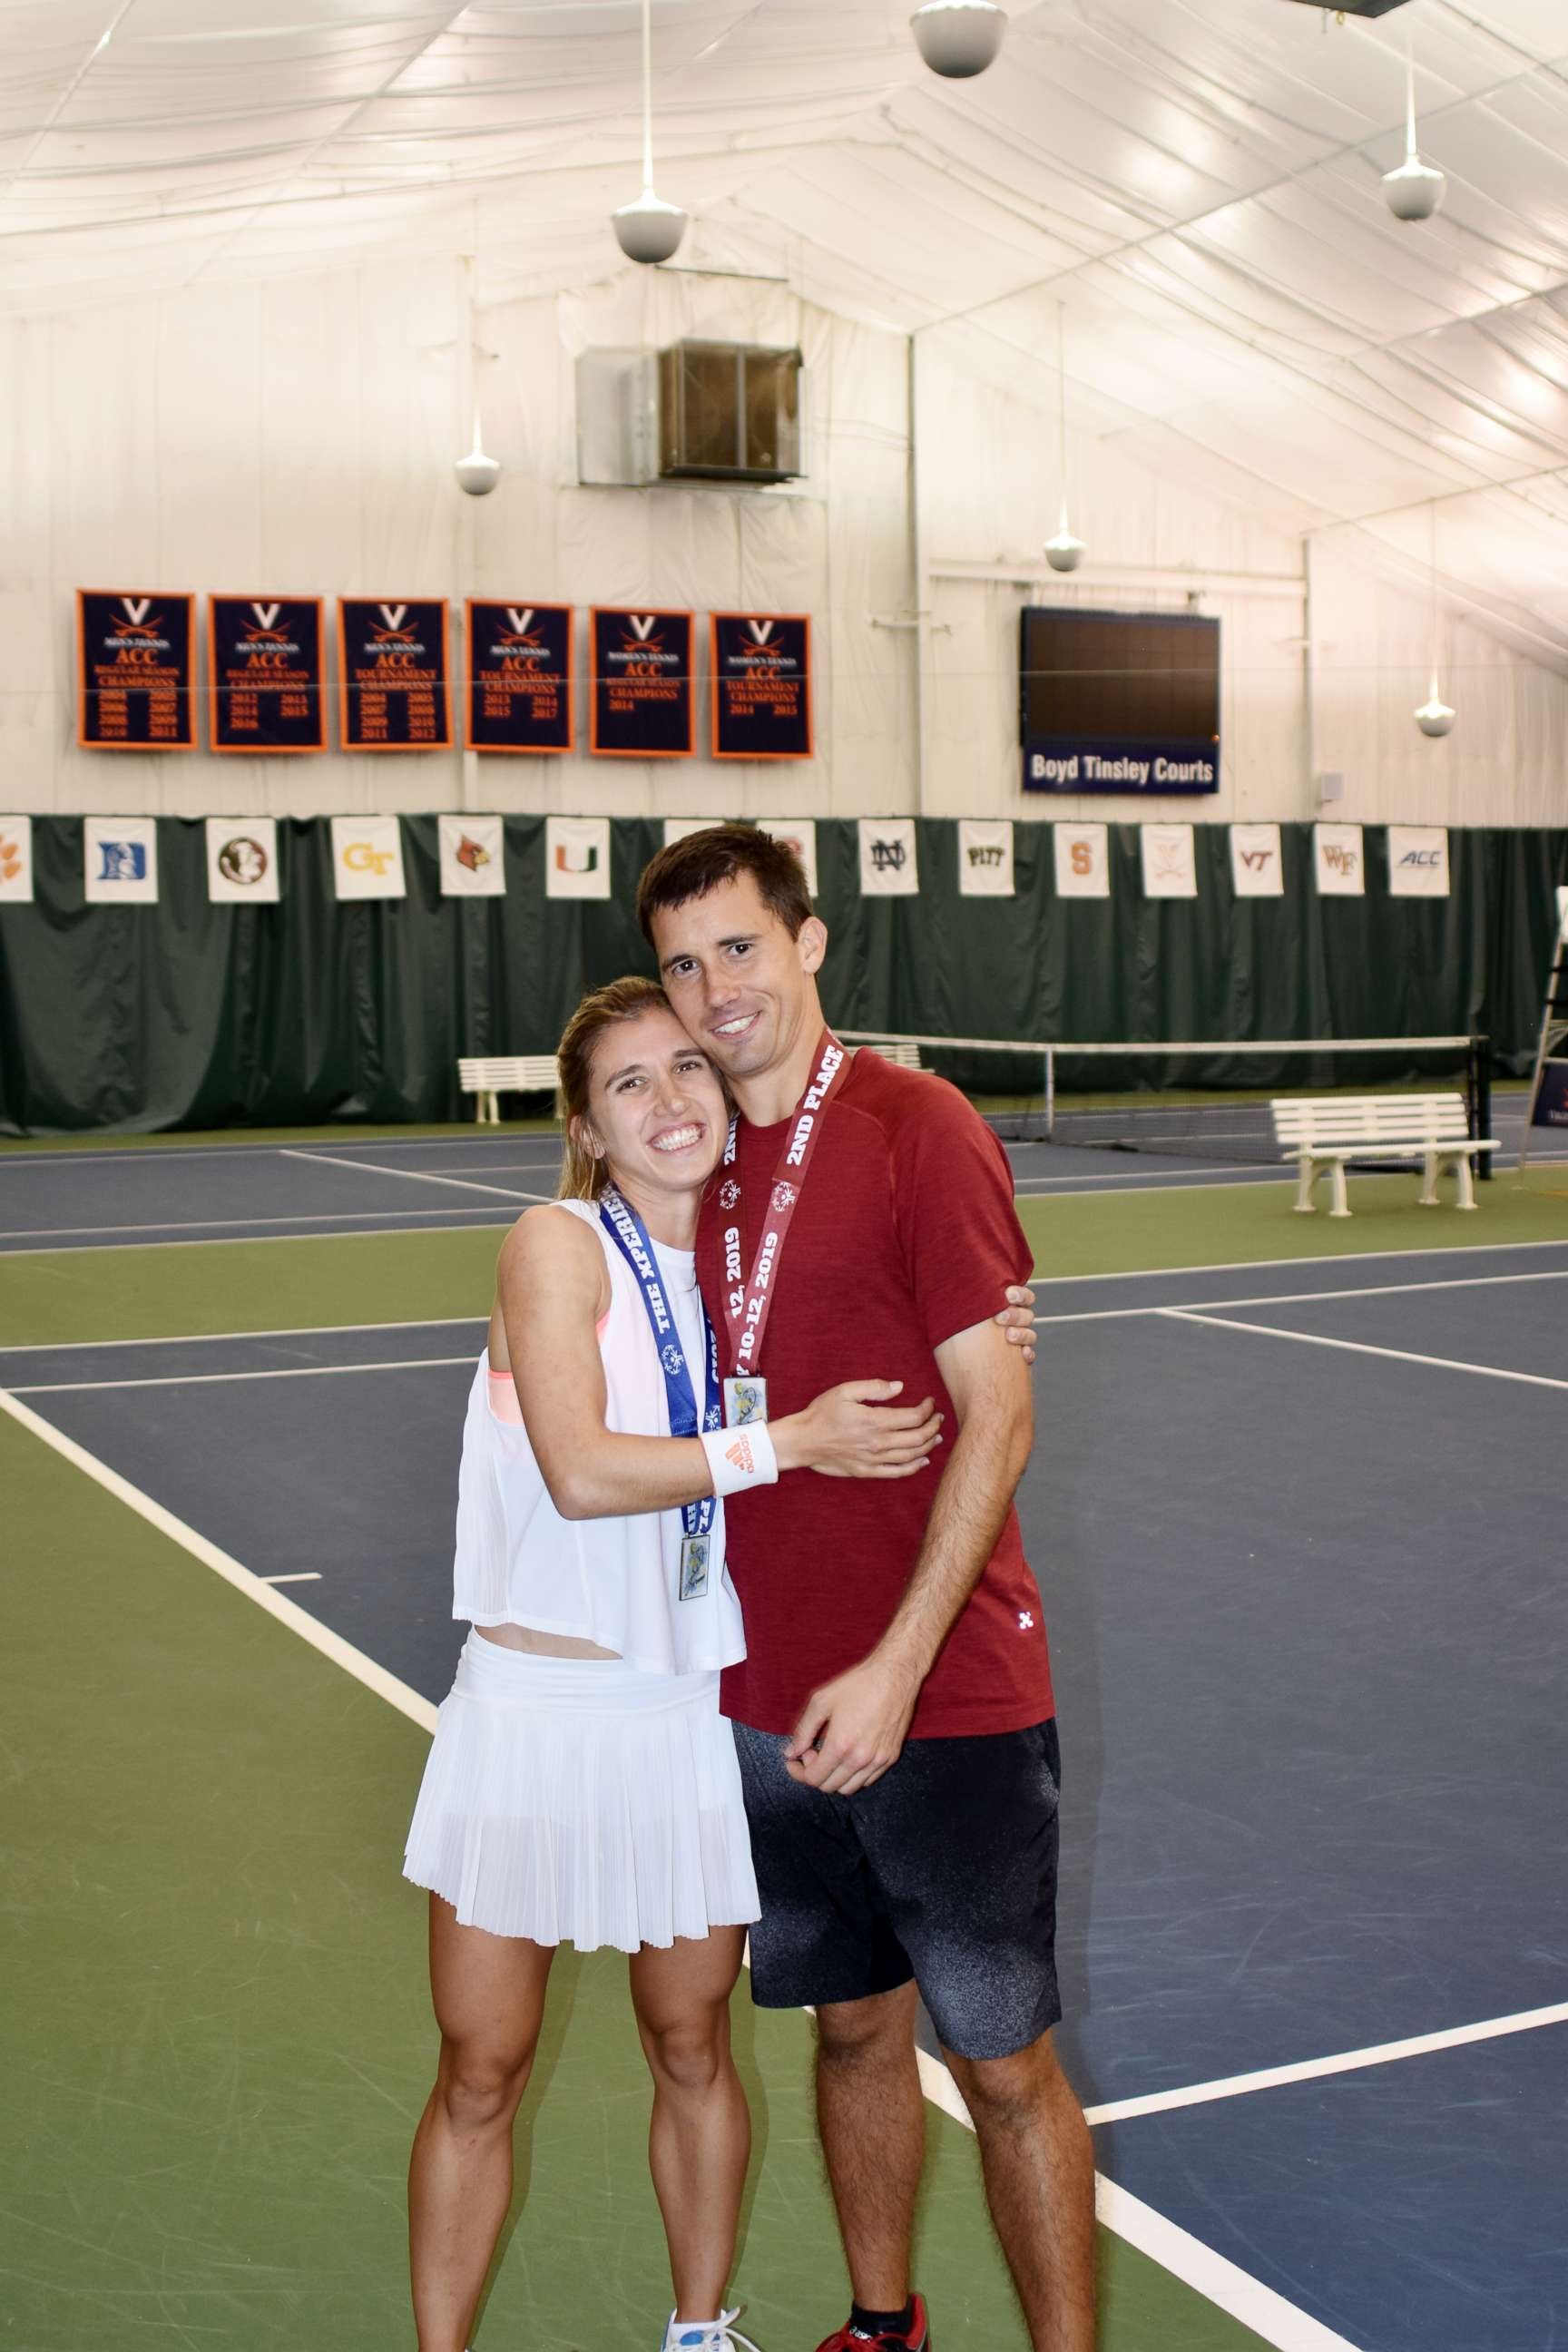 PHOTO: Brittany Taglireni and her fiance Ryan Smith are tennis partners in the 2019 Special Olympics in Abu Dhabi.